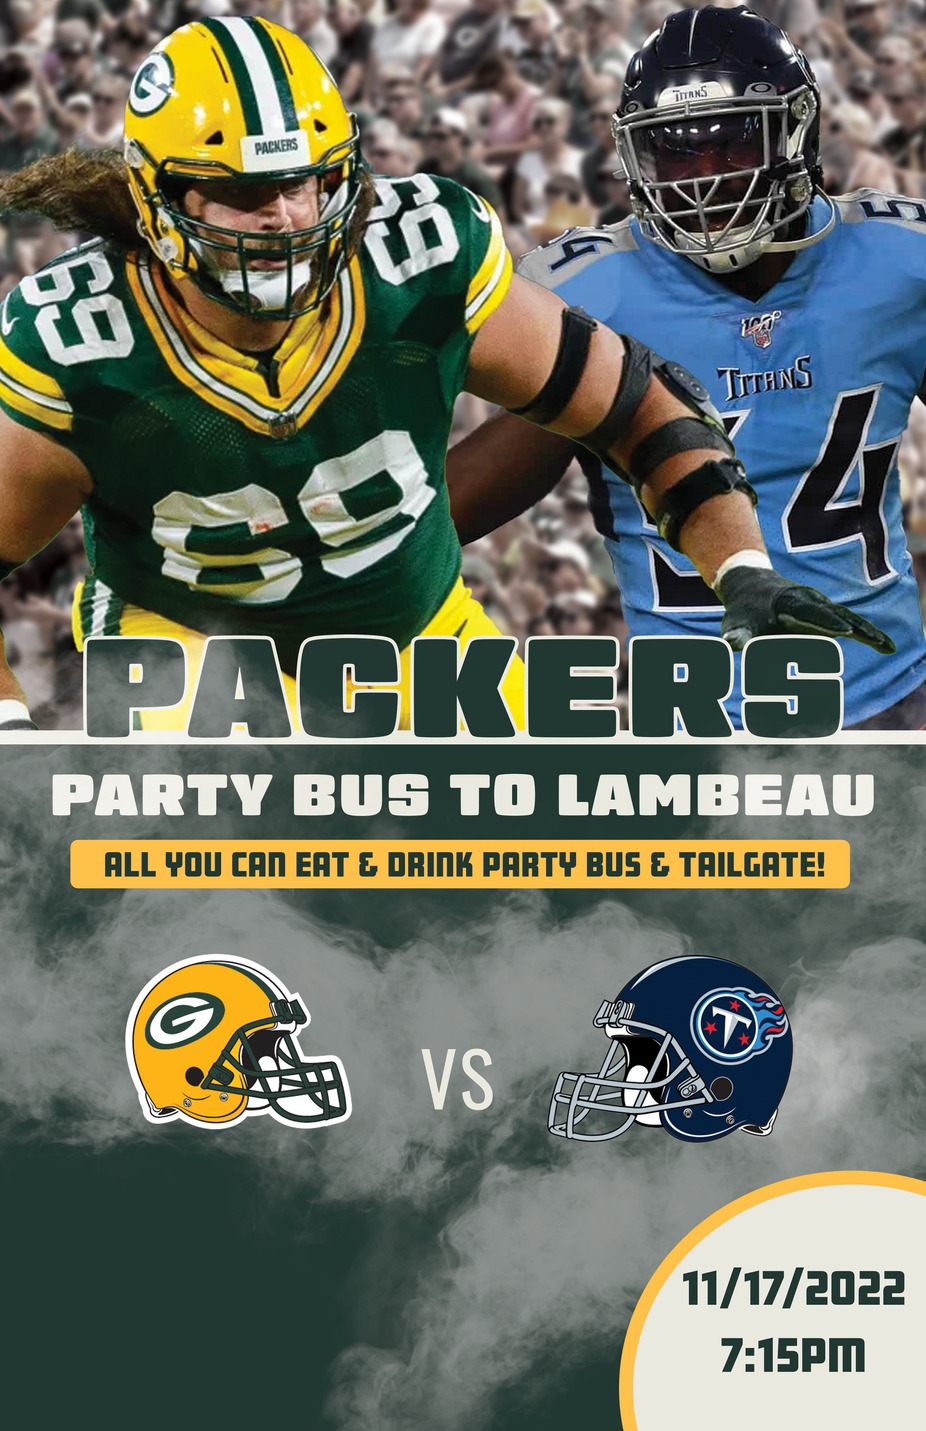 Packers Vs. Titans Party Bus to Lambeau event photo